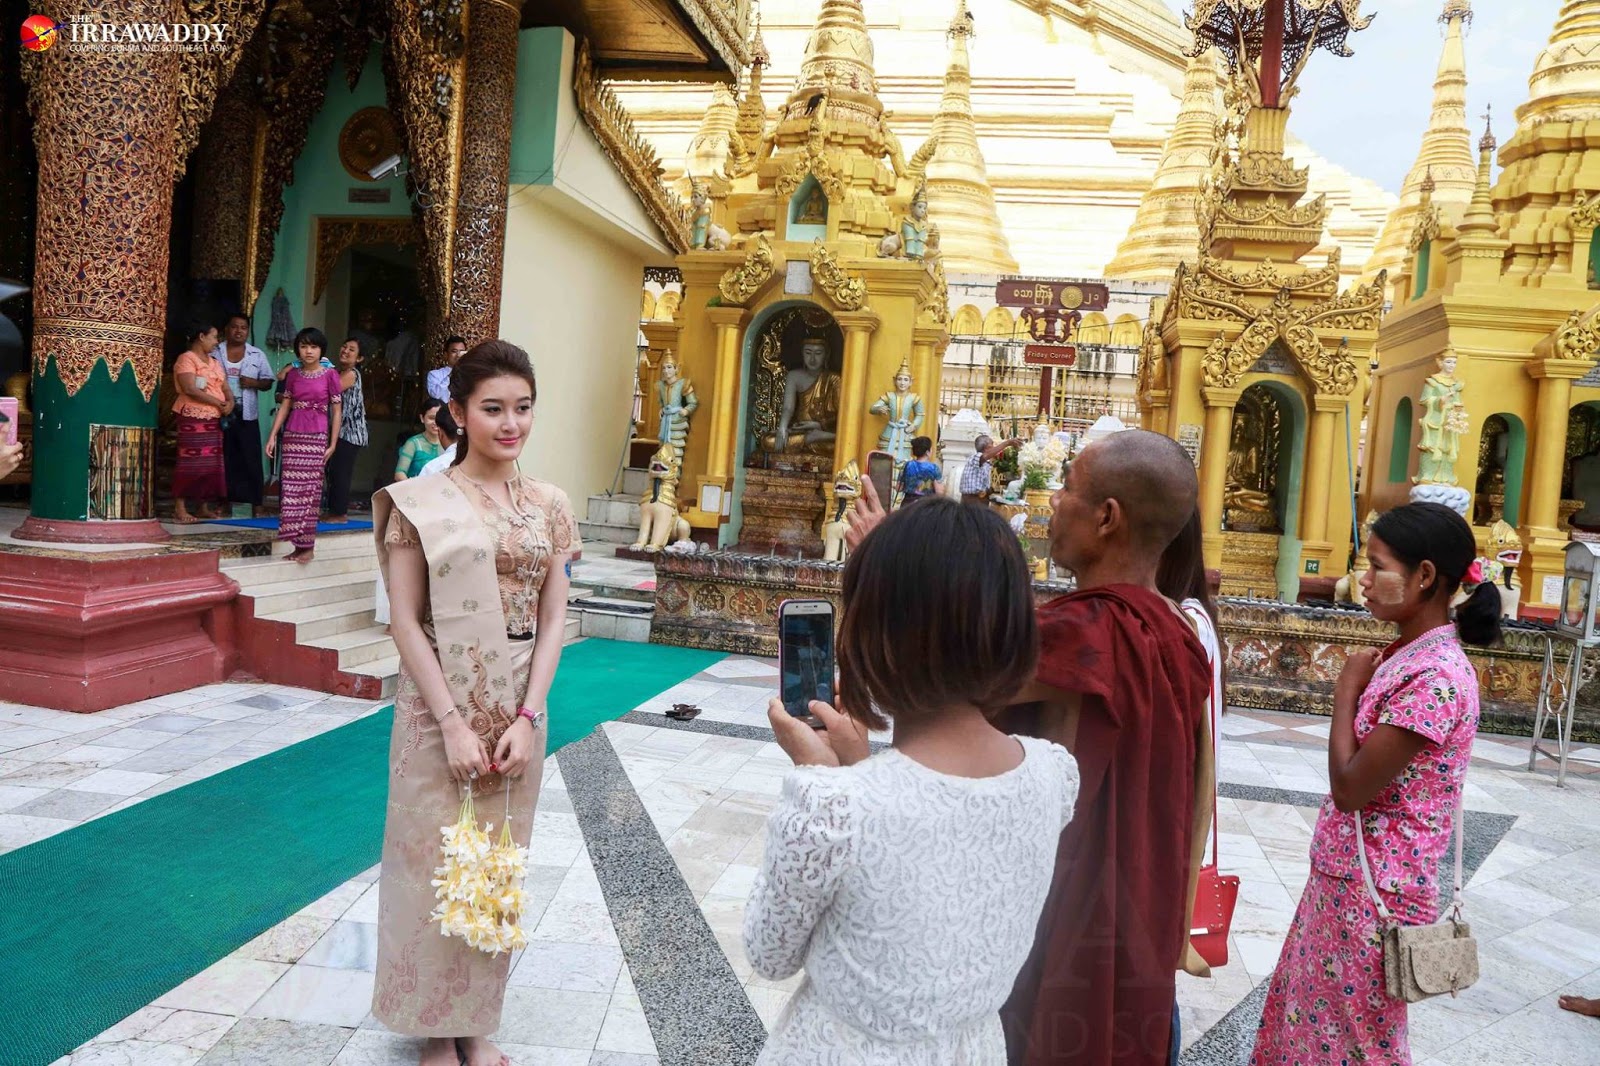 Nguyễn Trần Huyền Visits To Yangon for second time to star in new Myanmar Movie with Nay Toe